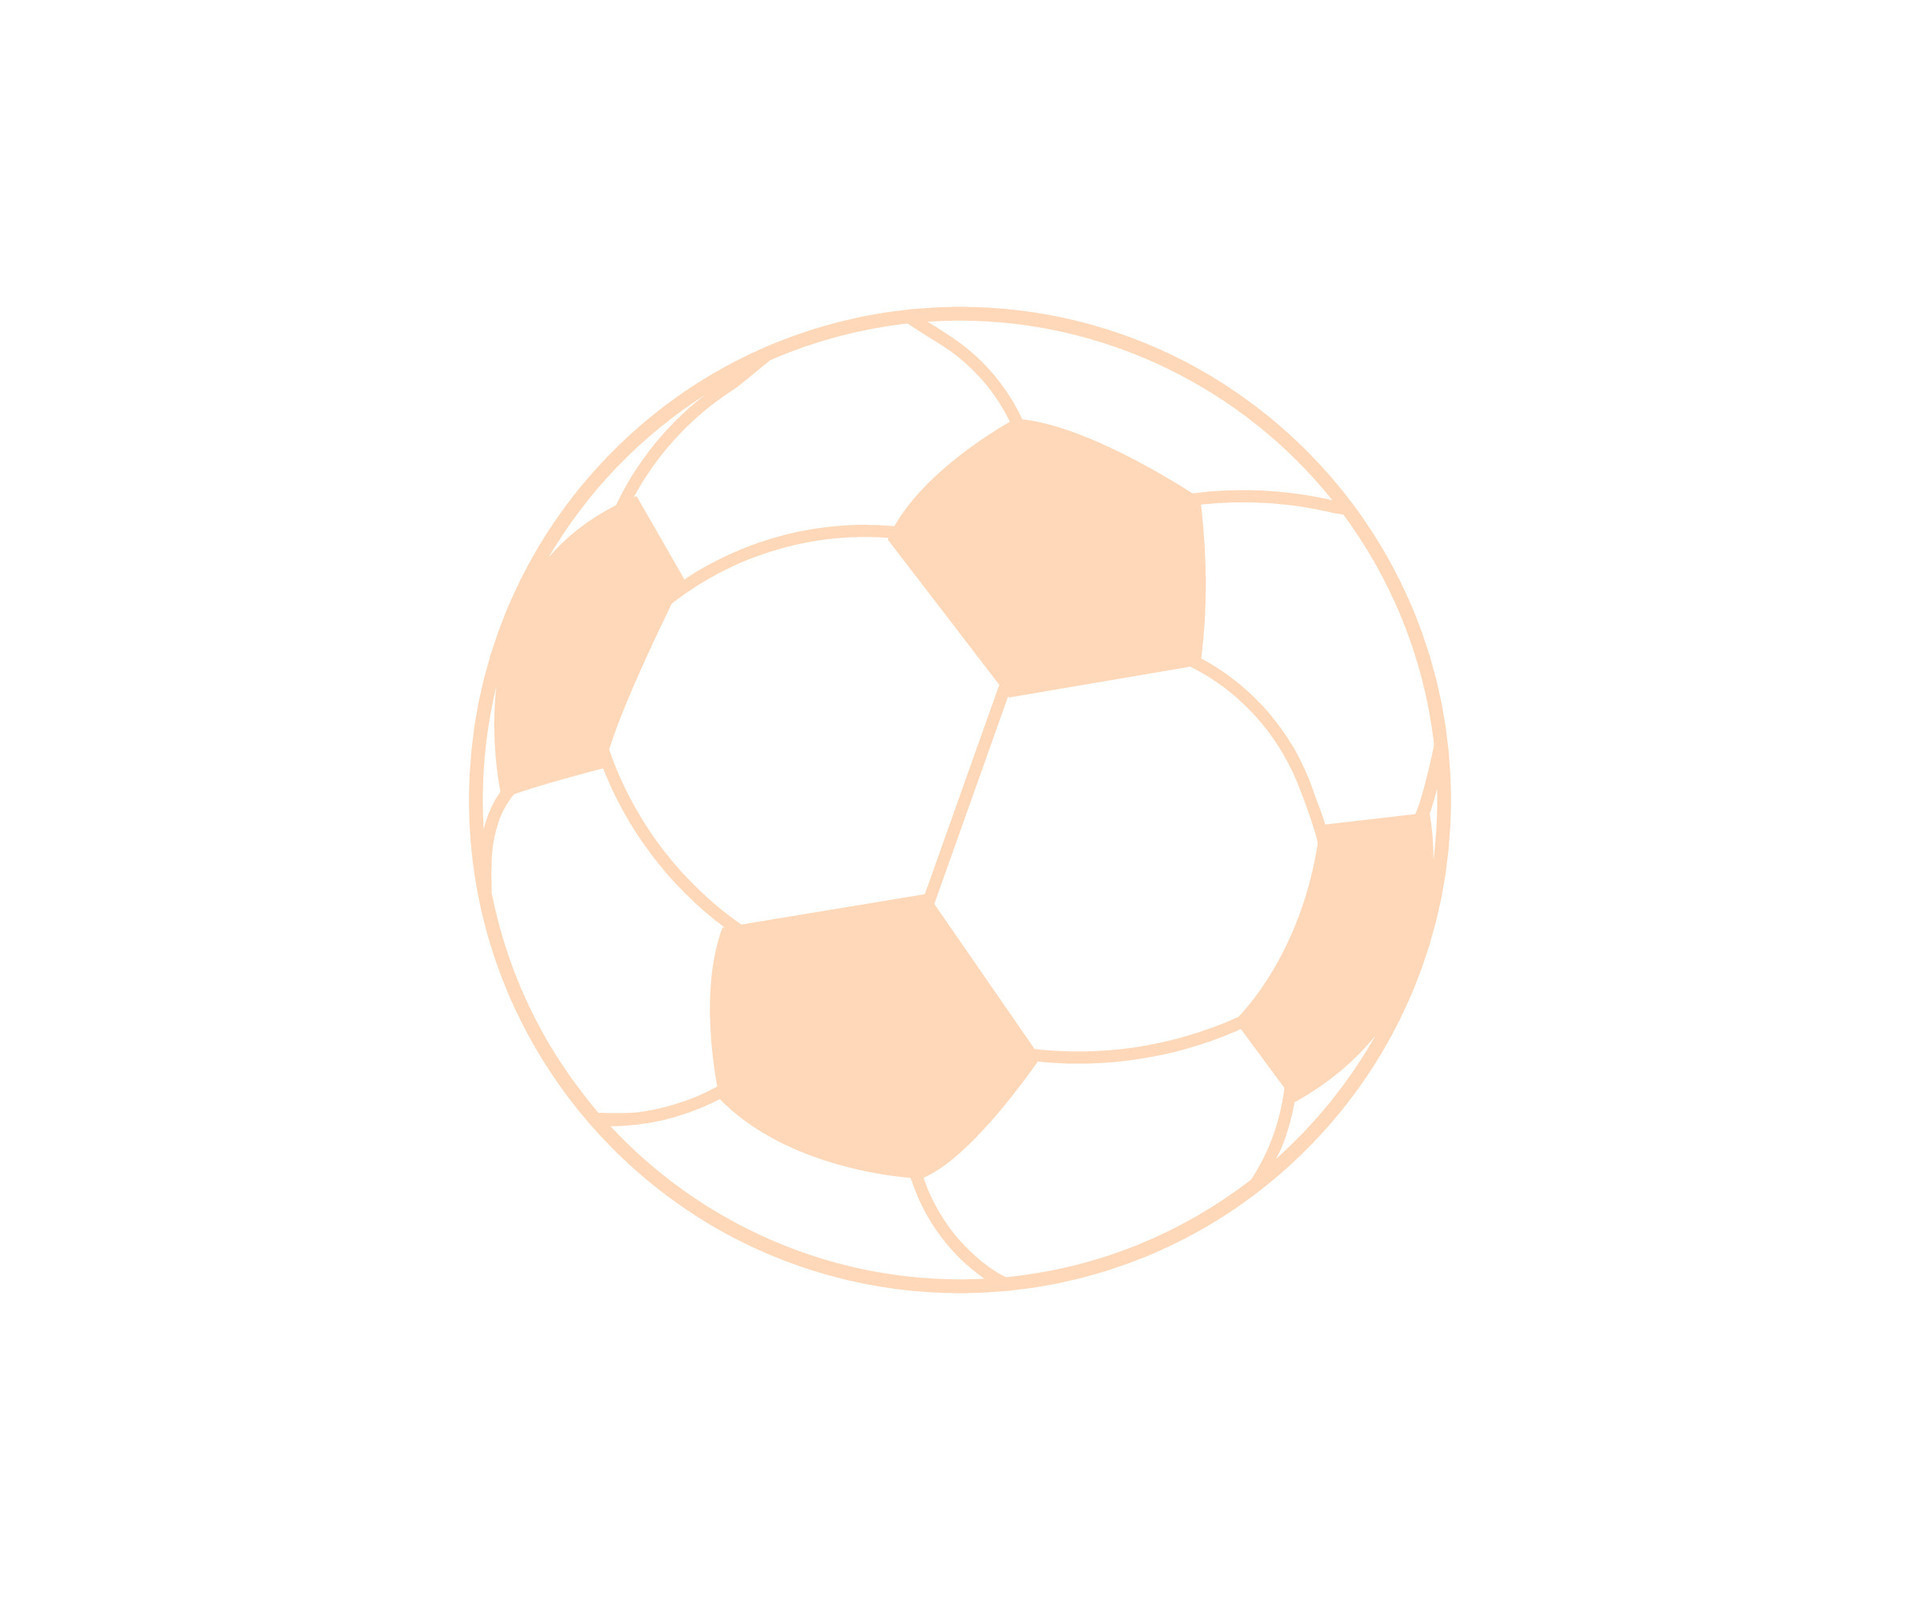 Peach Football Line Art Drawing Vector Art, Icons, and Graphics coloring  page for kids 28547857 Vector Art at Vecteezy